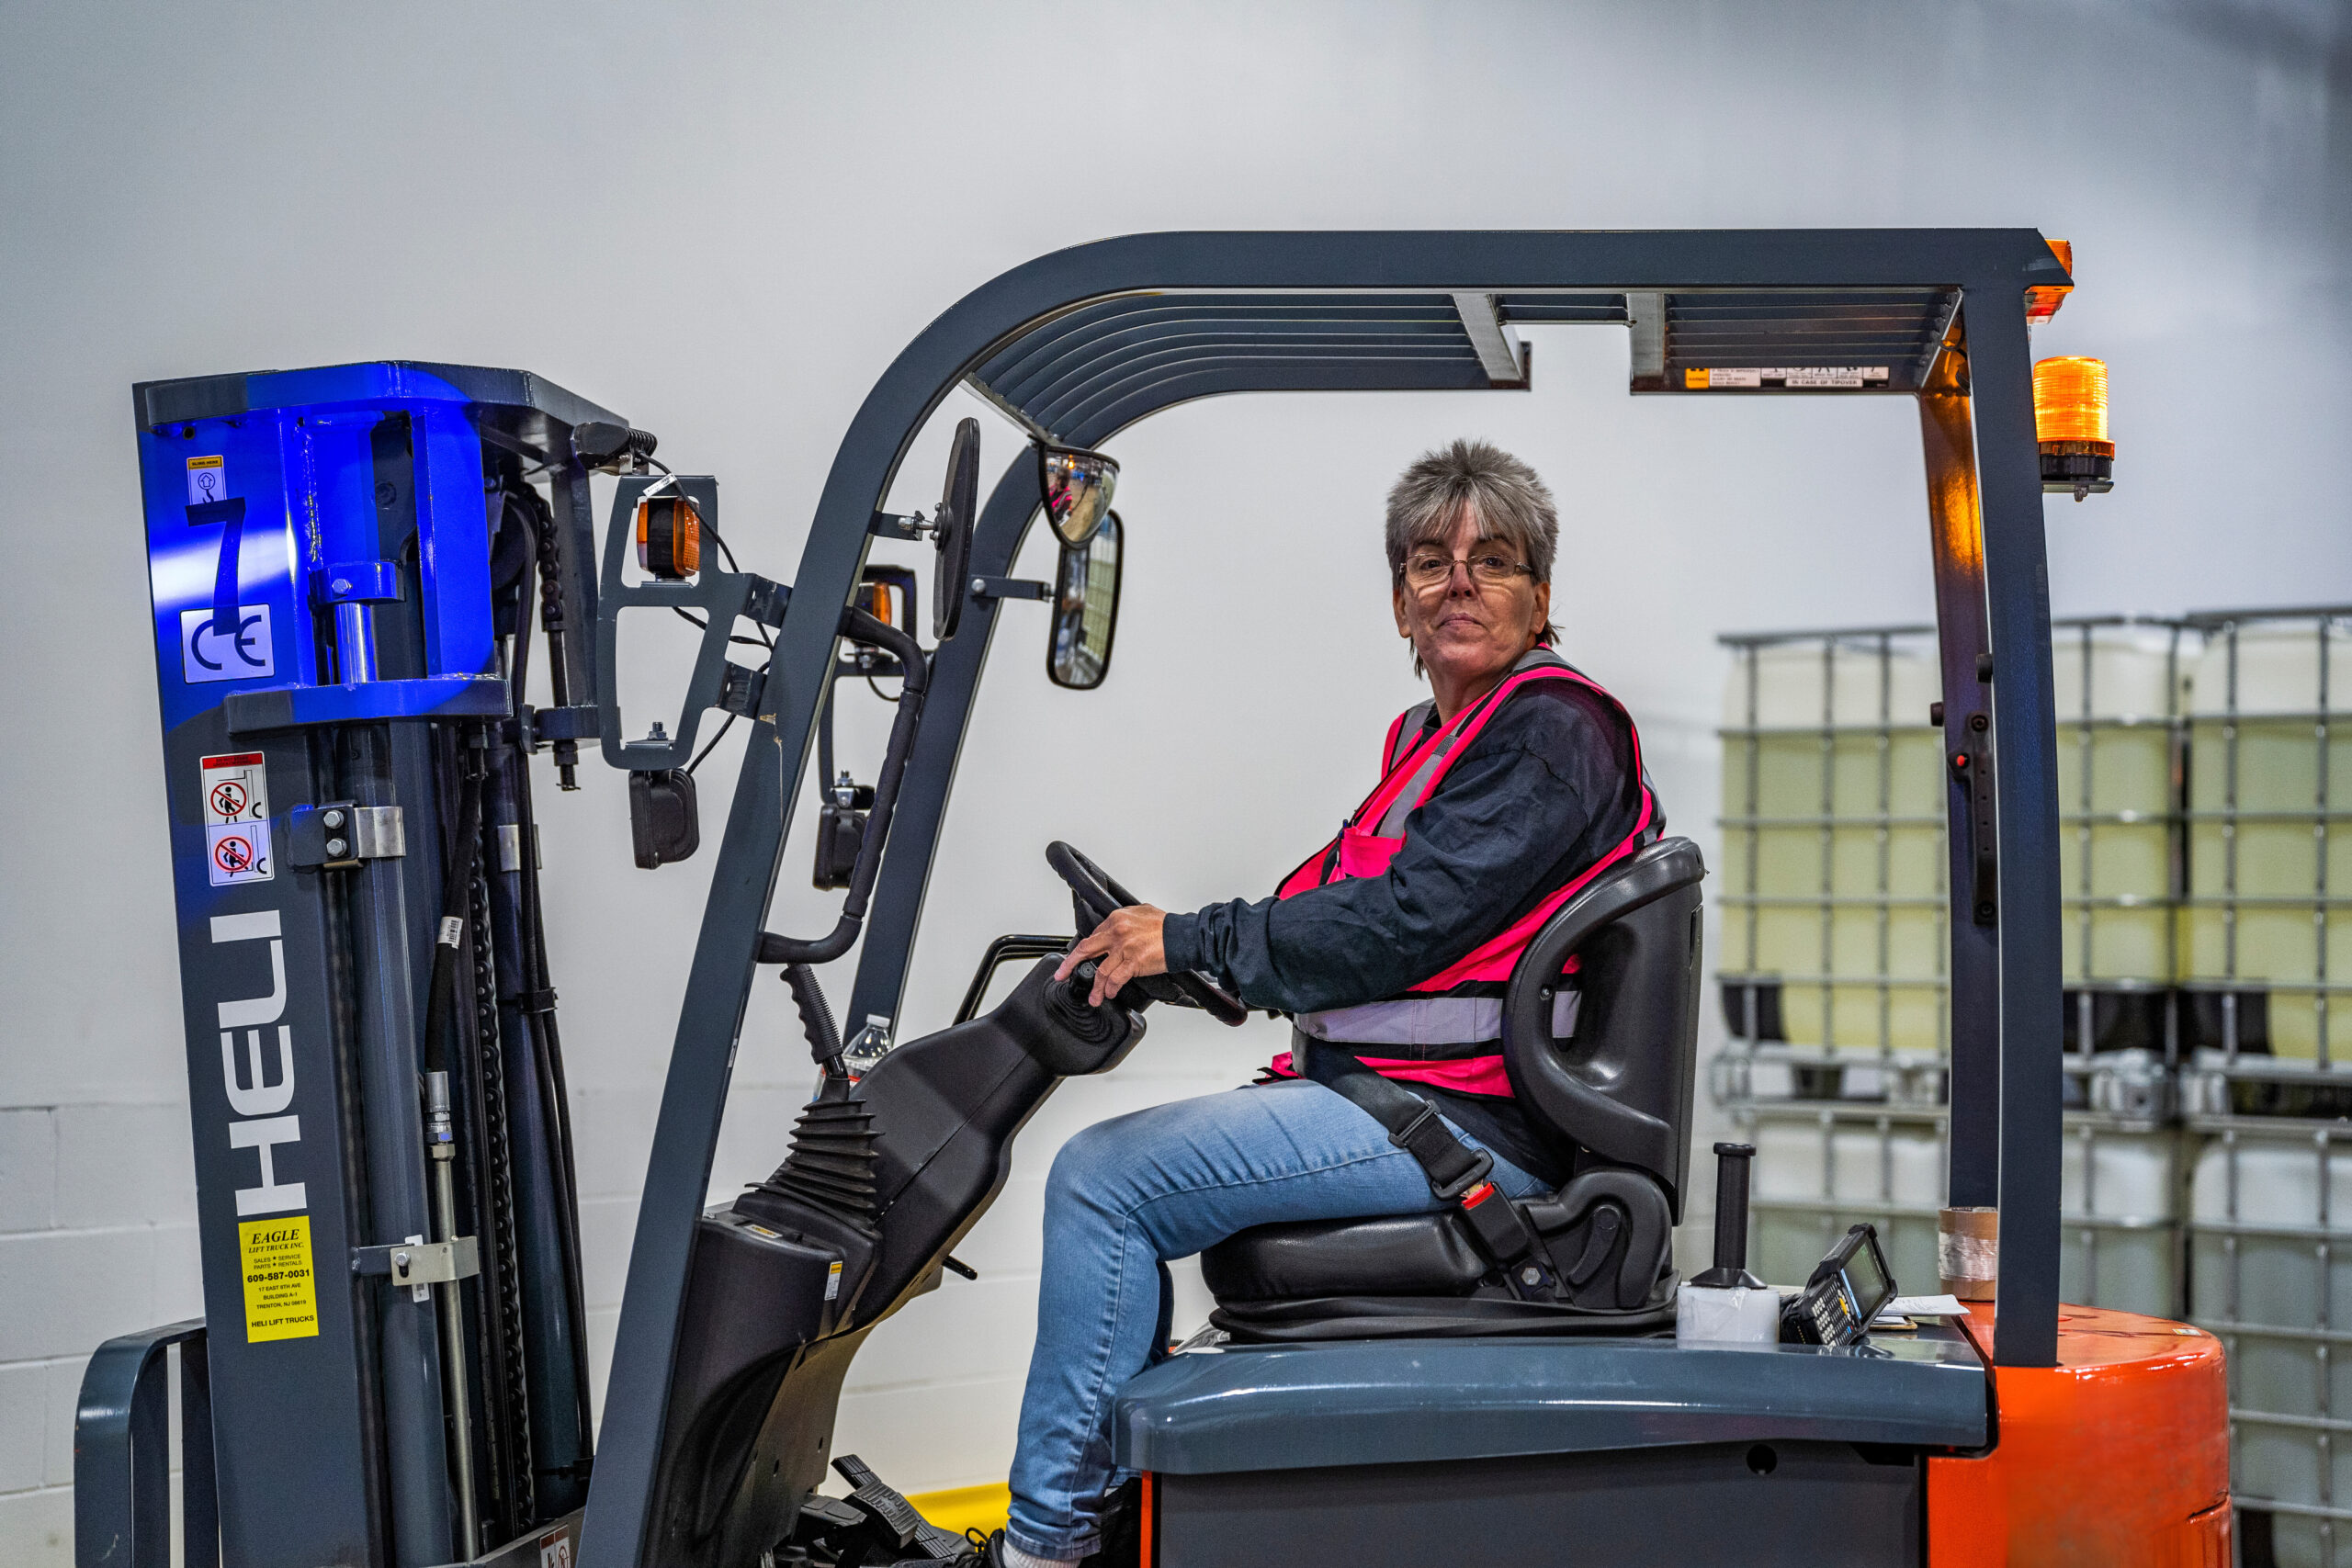 A woman operating a forklift from the driver's seat, focused and ready to handle heavy loads efficiently.